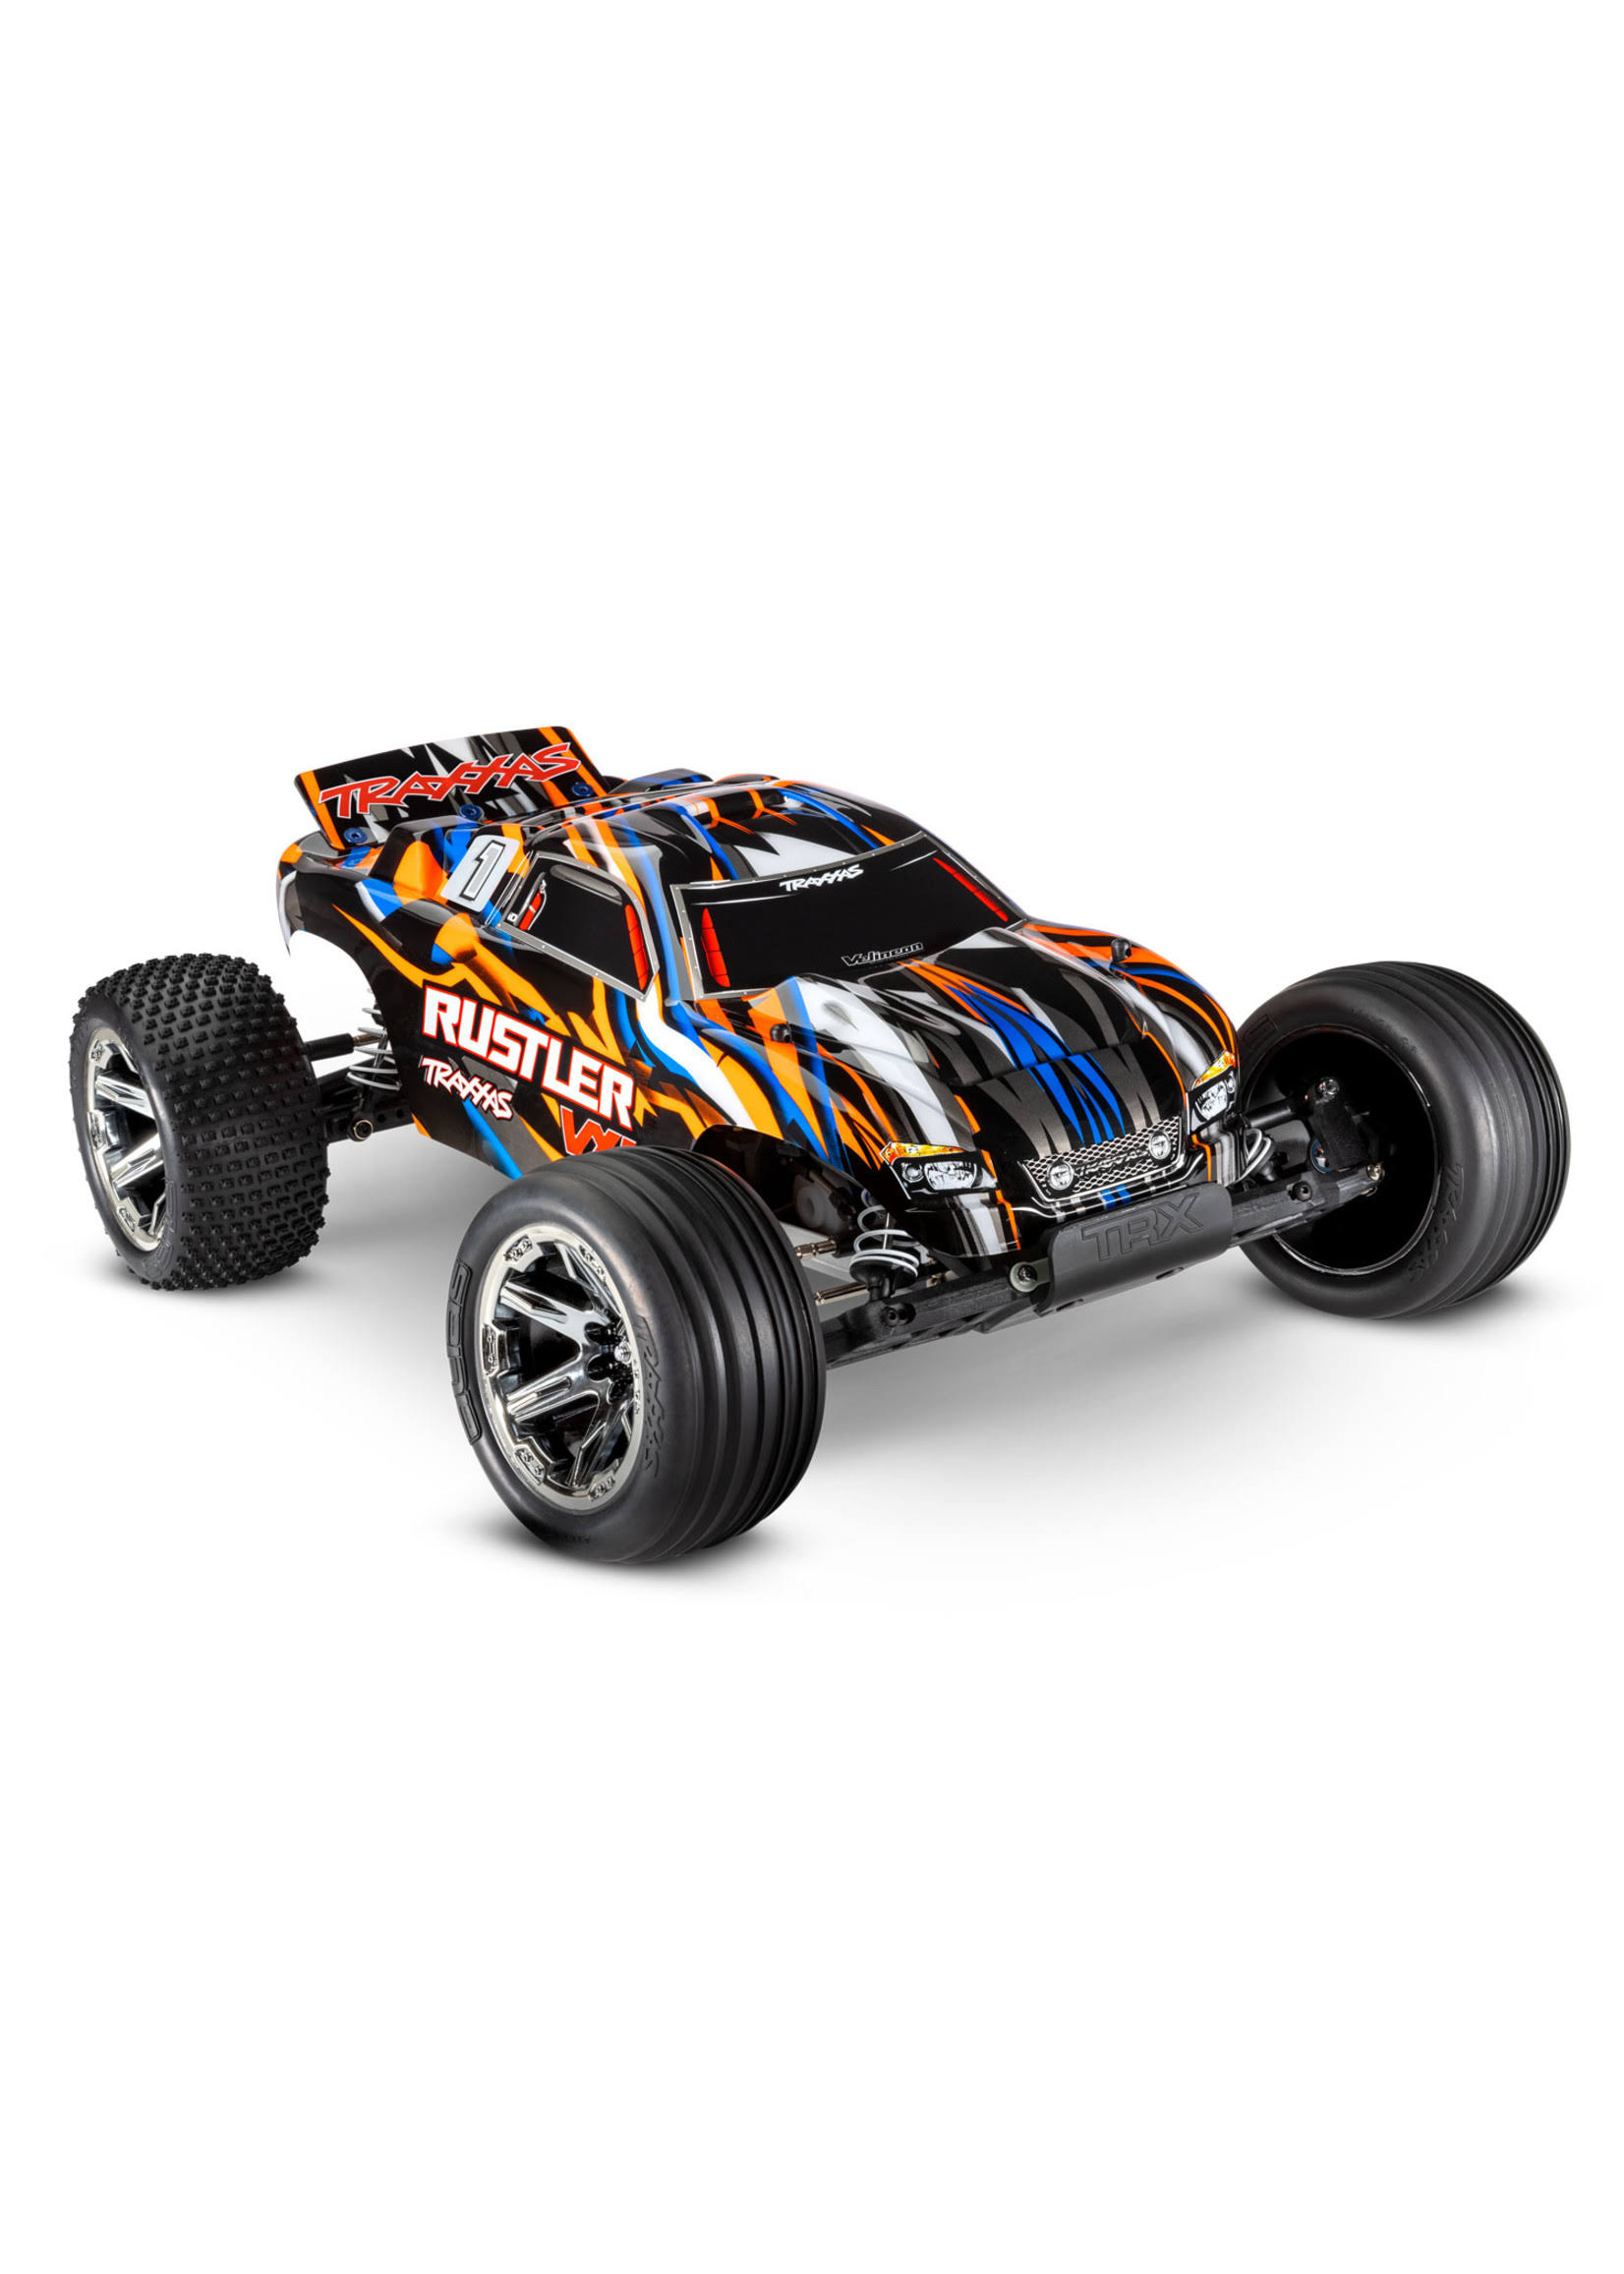 Traxxas Rustler VXL Brushless 1/10 RTR With Magnum Transmission. No battery Or Charger. Orange